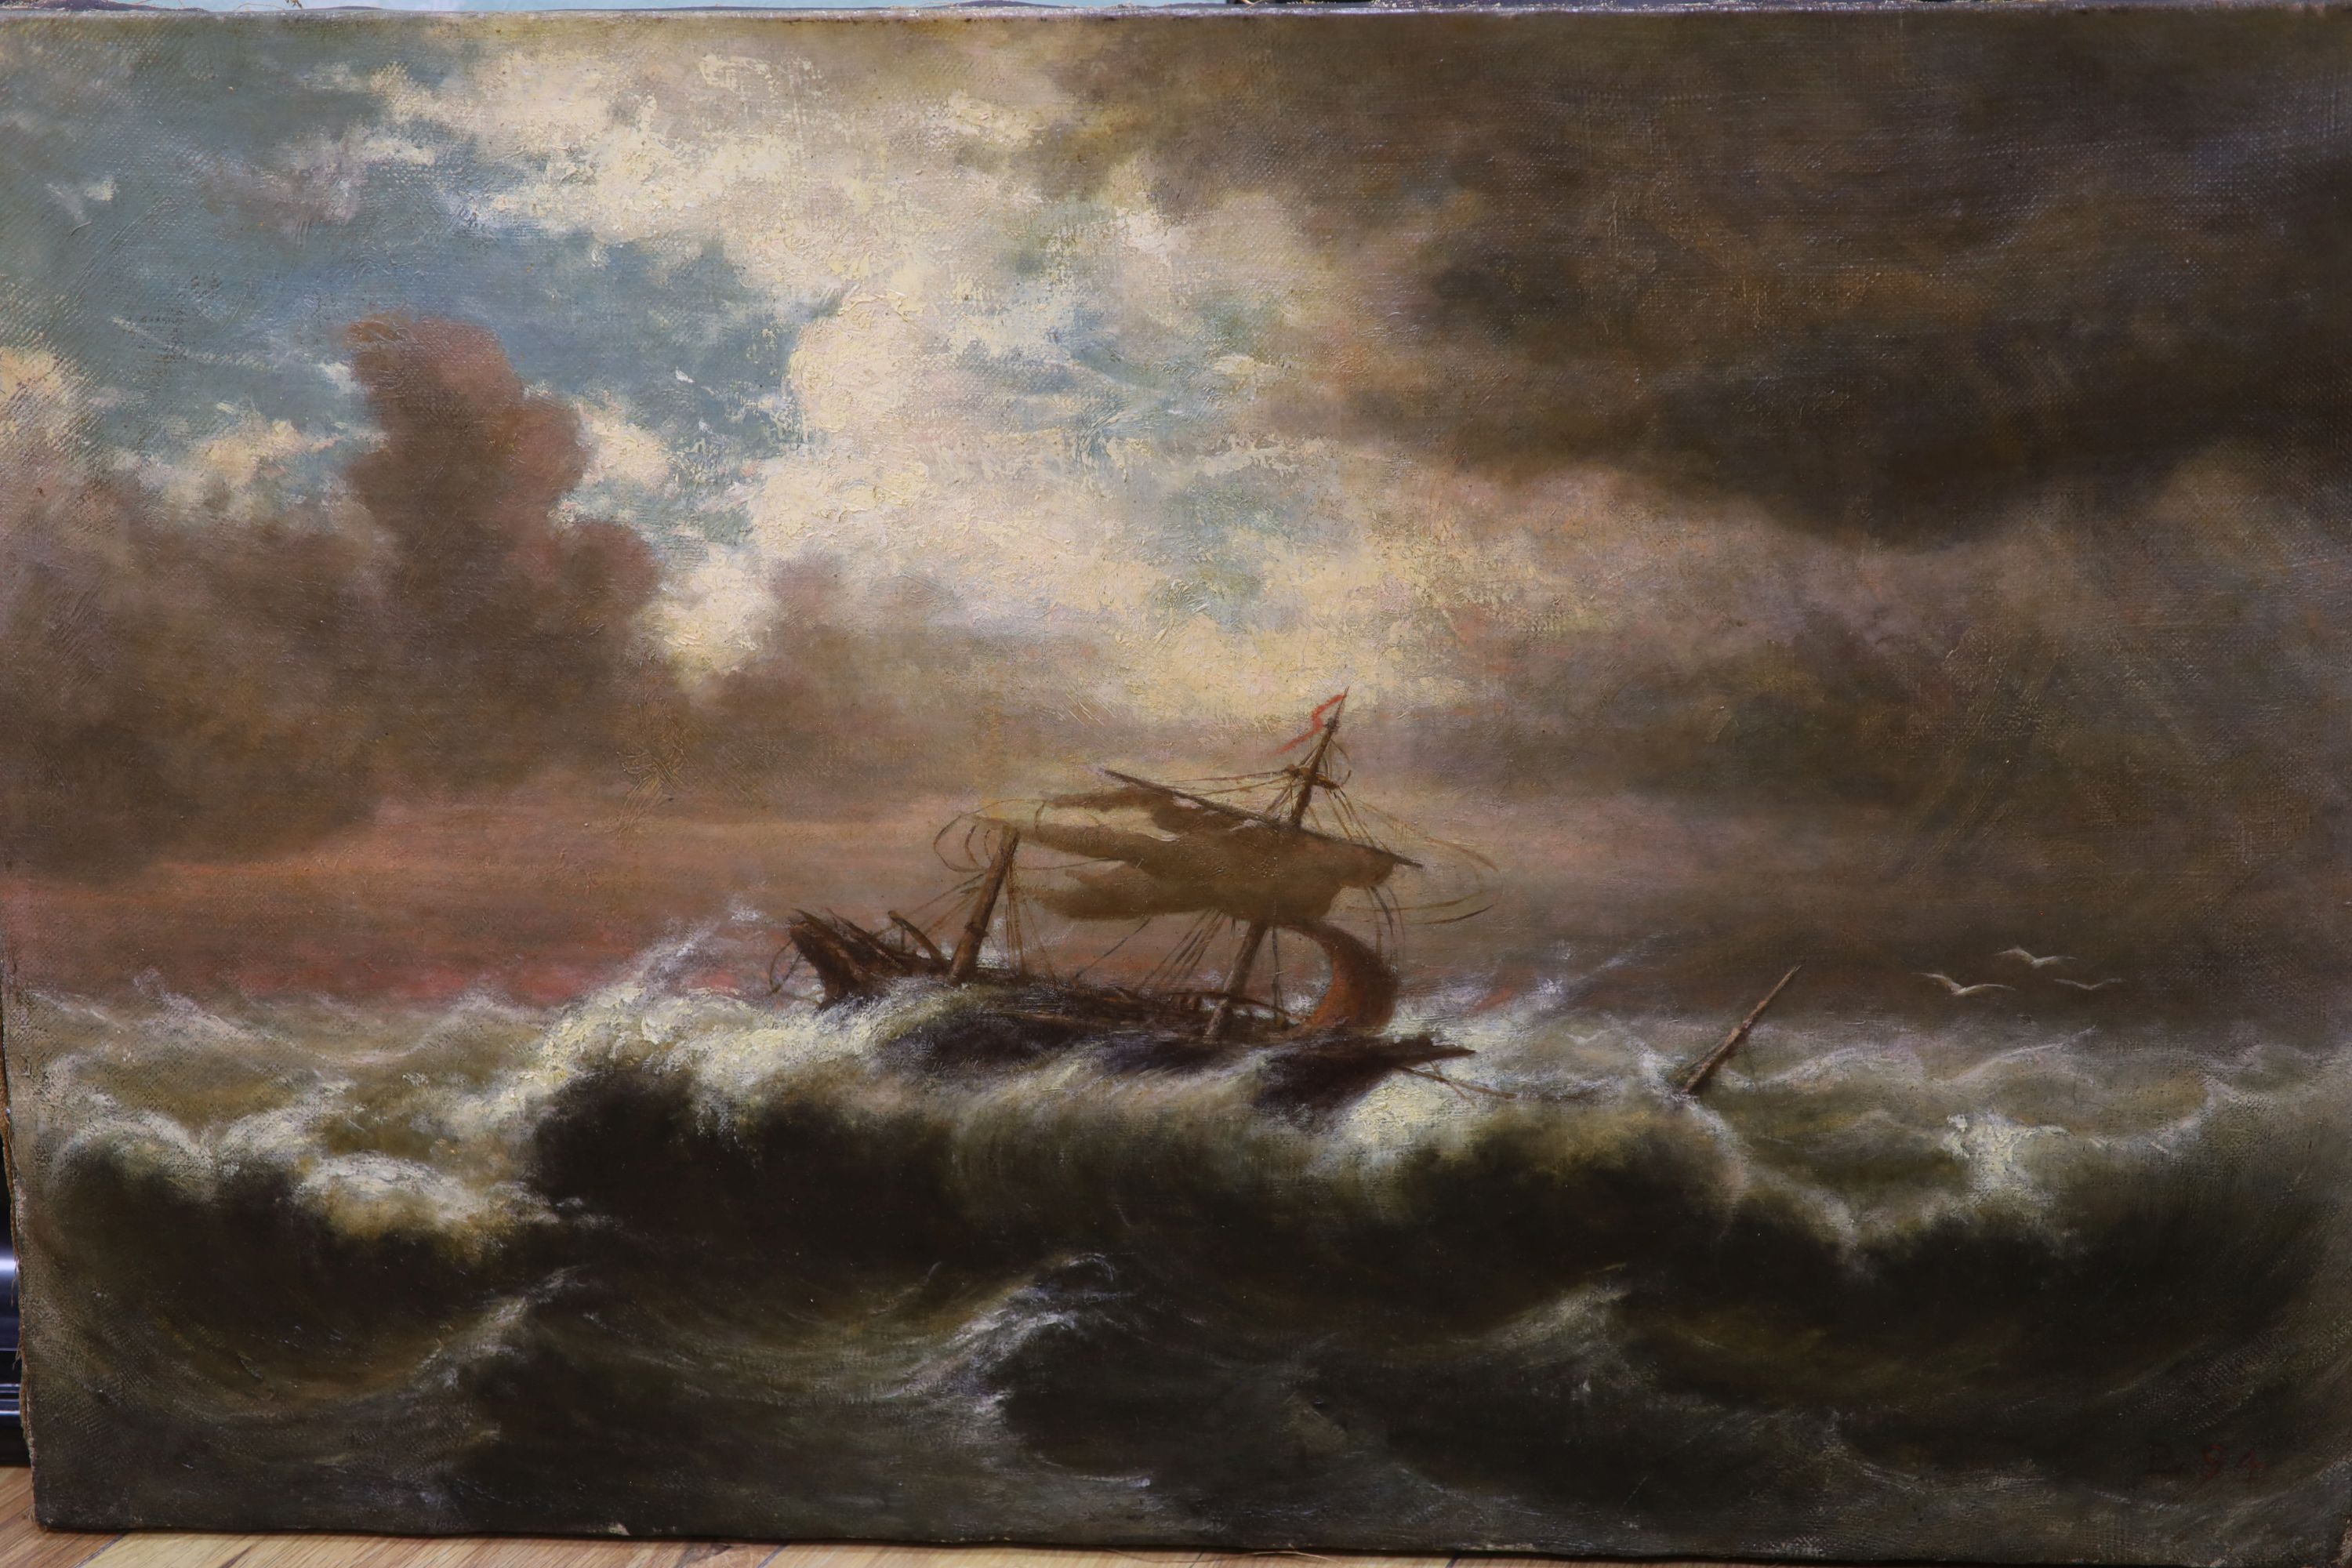 Continental School, study of a ship on turbulent waters below a breaking sky, oil on canvas, unframed, 38 x 59 cm.